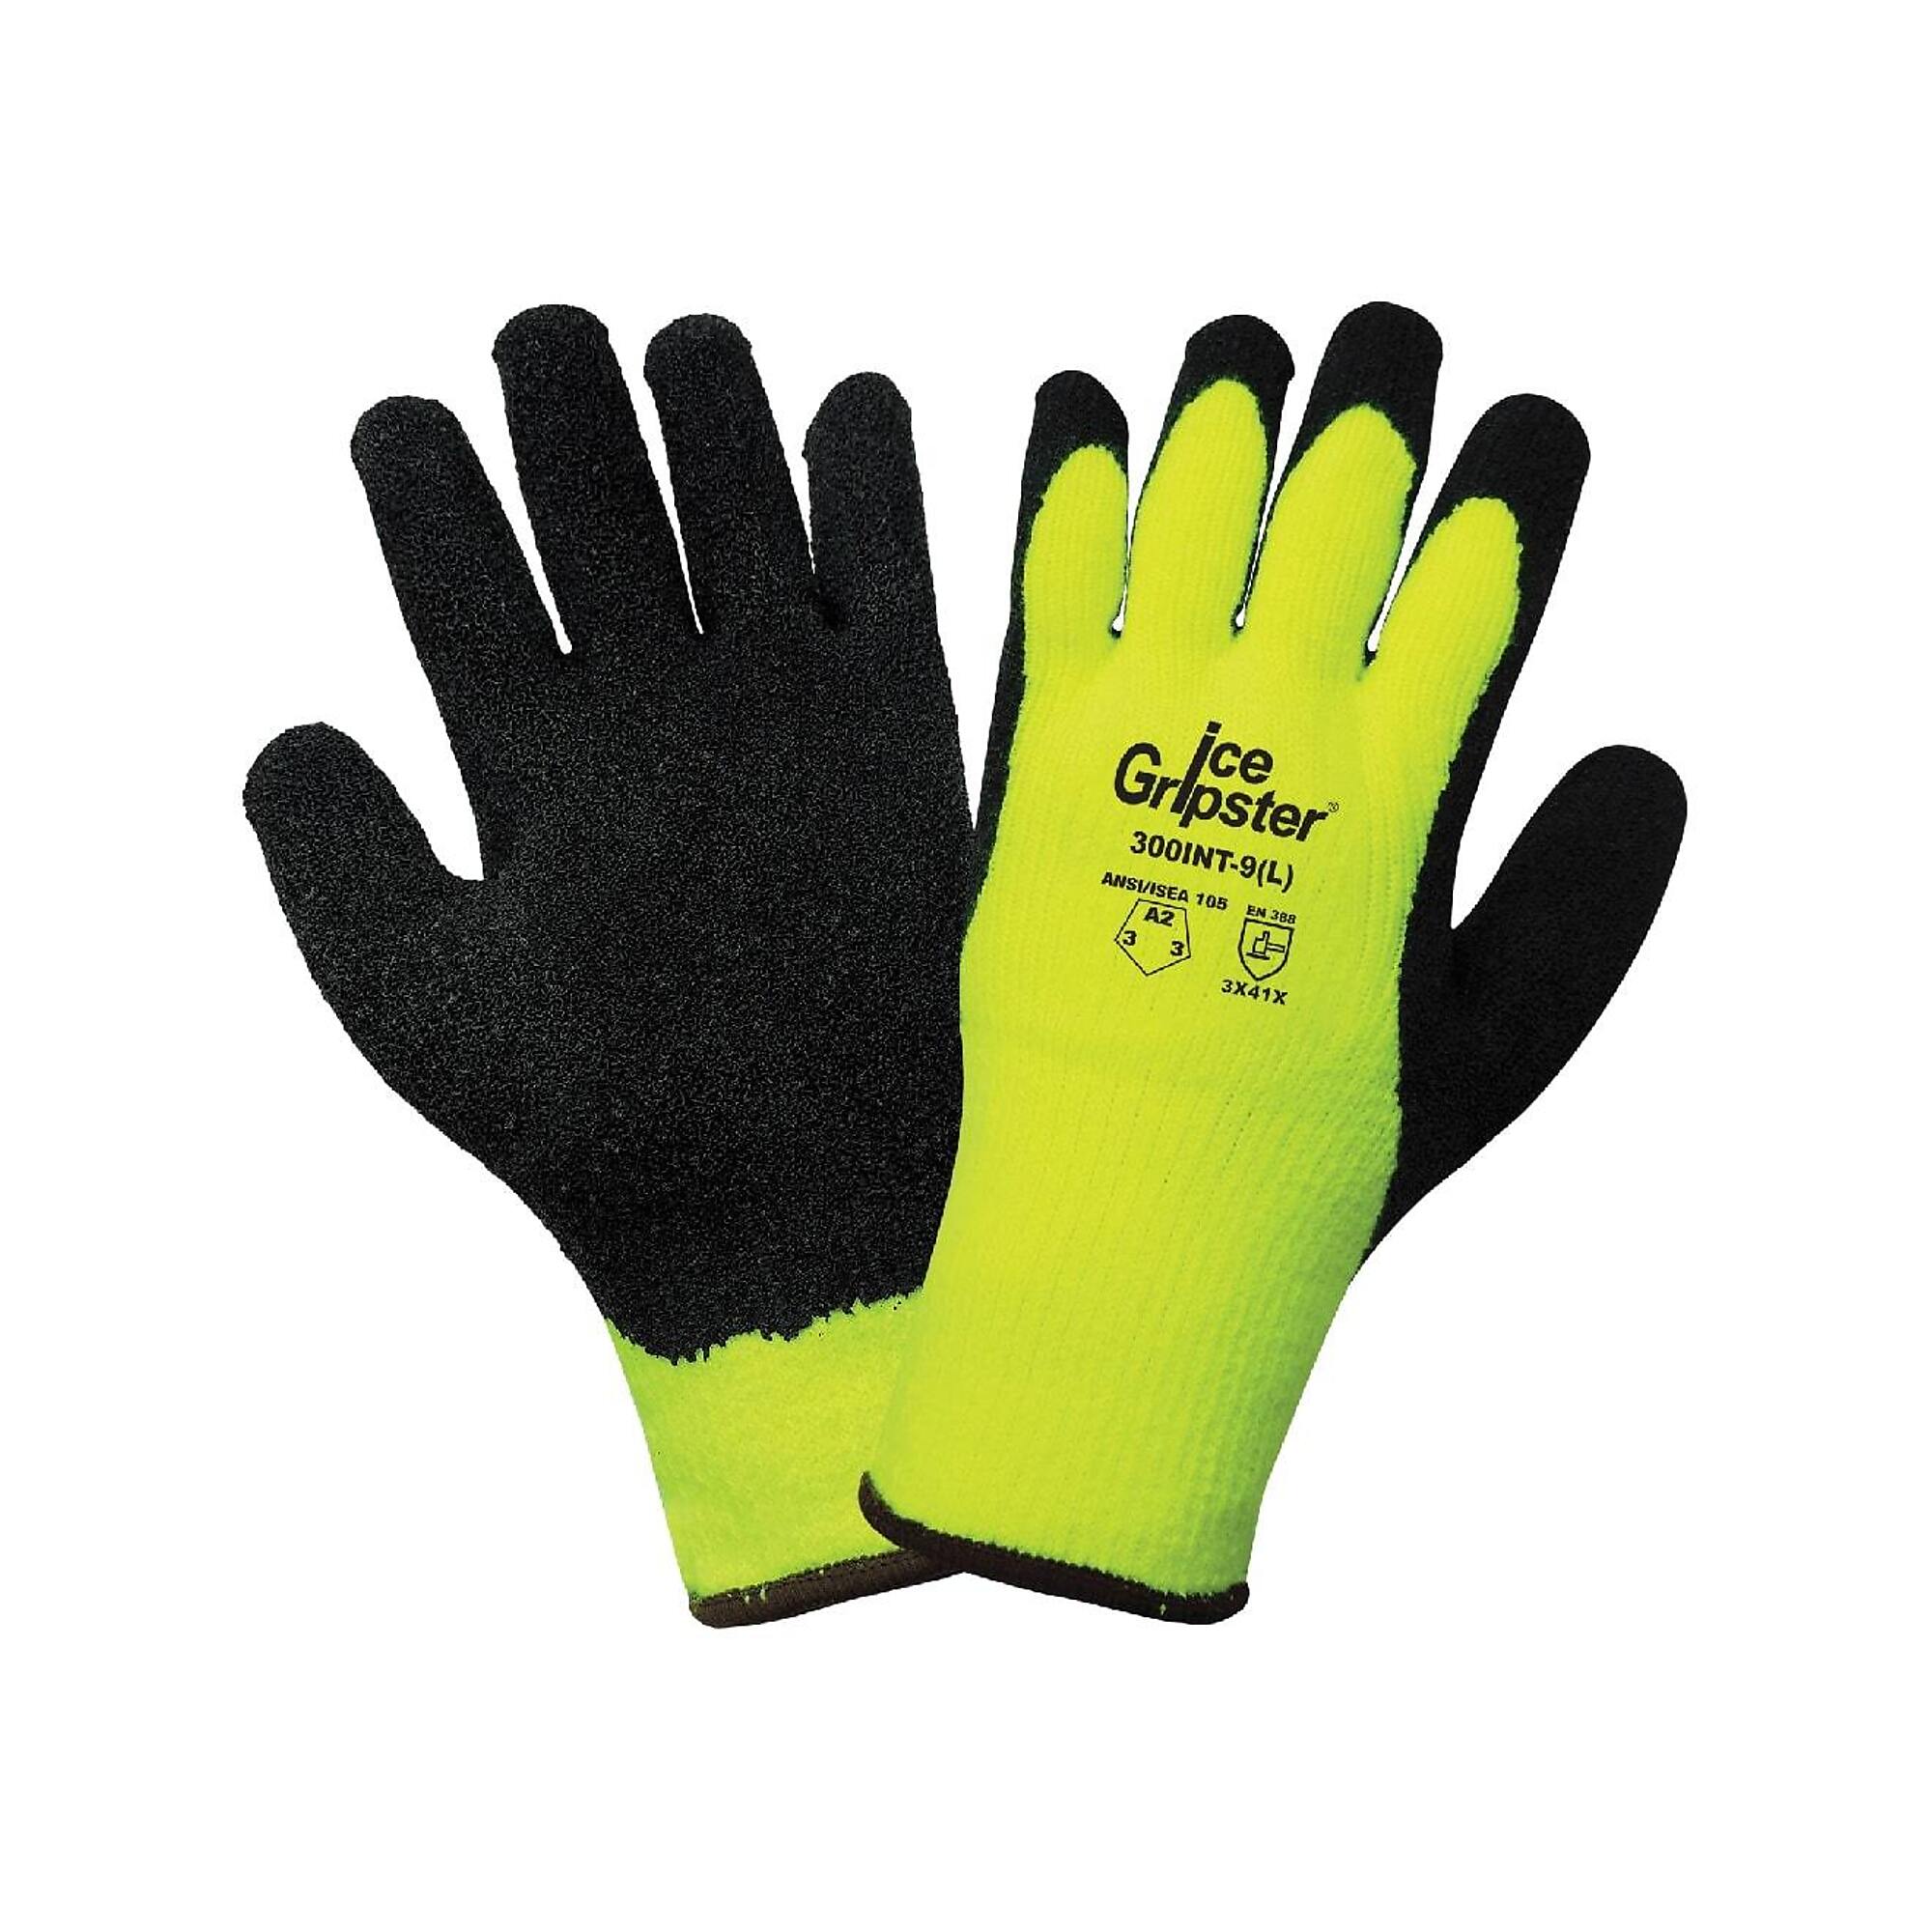 Global Glove Ice Gripster , HV Insulated, Wat-Resist, Rub Dip, Cut A2 Gloves - 12 Pairs, Size XL, Color High-Visibility Yellow/Black, Included (qty.)